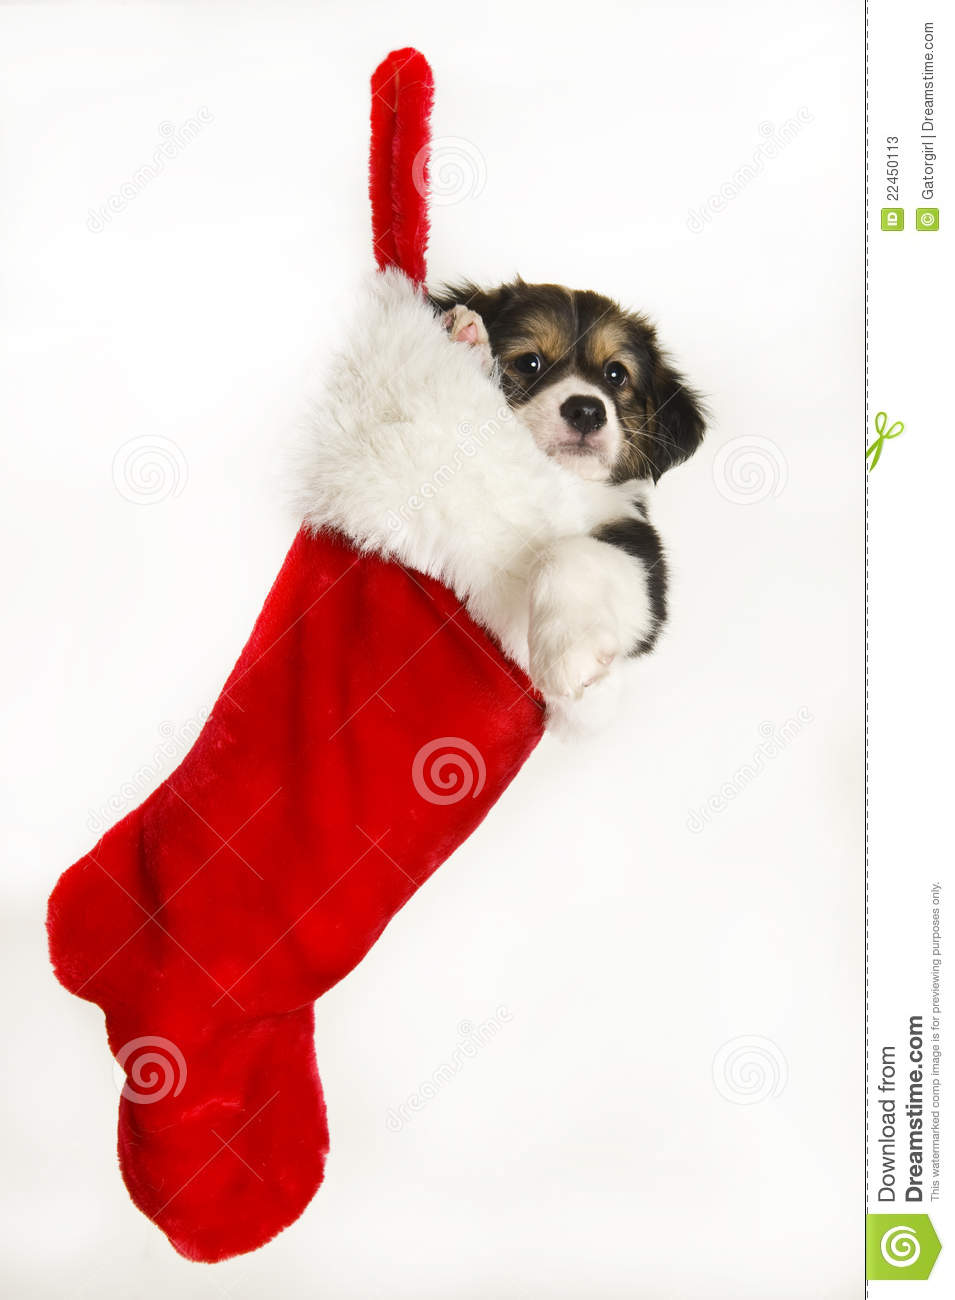 Similar Stock Images Of   Cute Puppy In Christmas Stocking Hanging